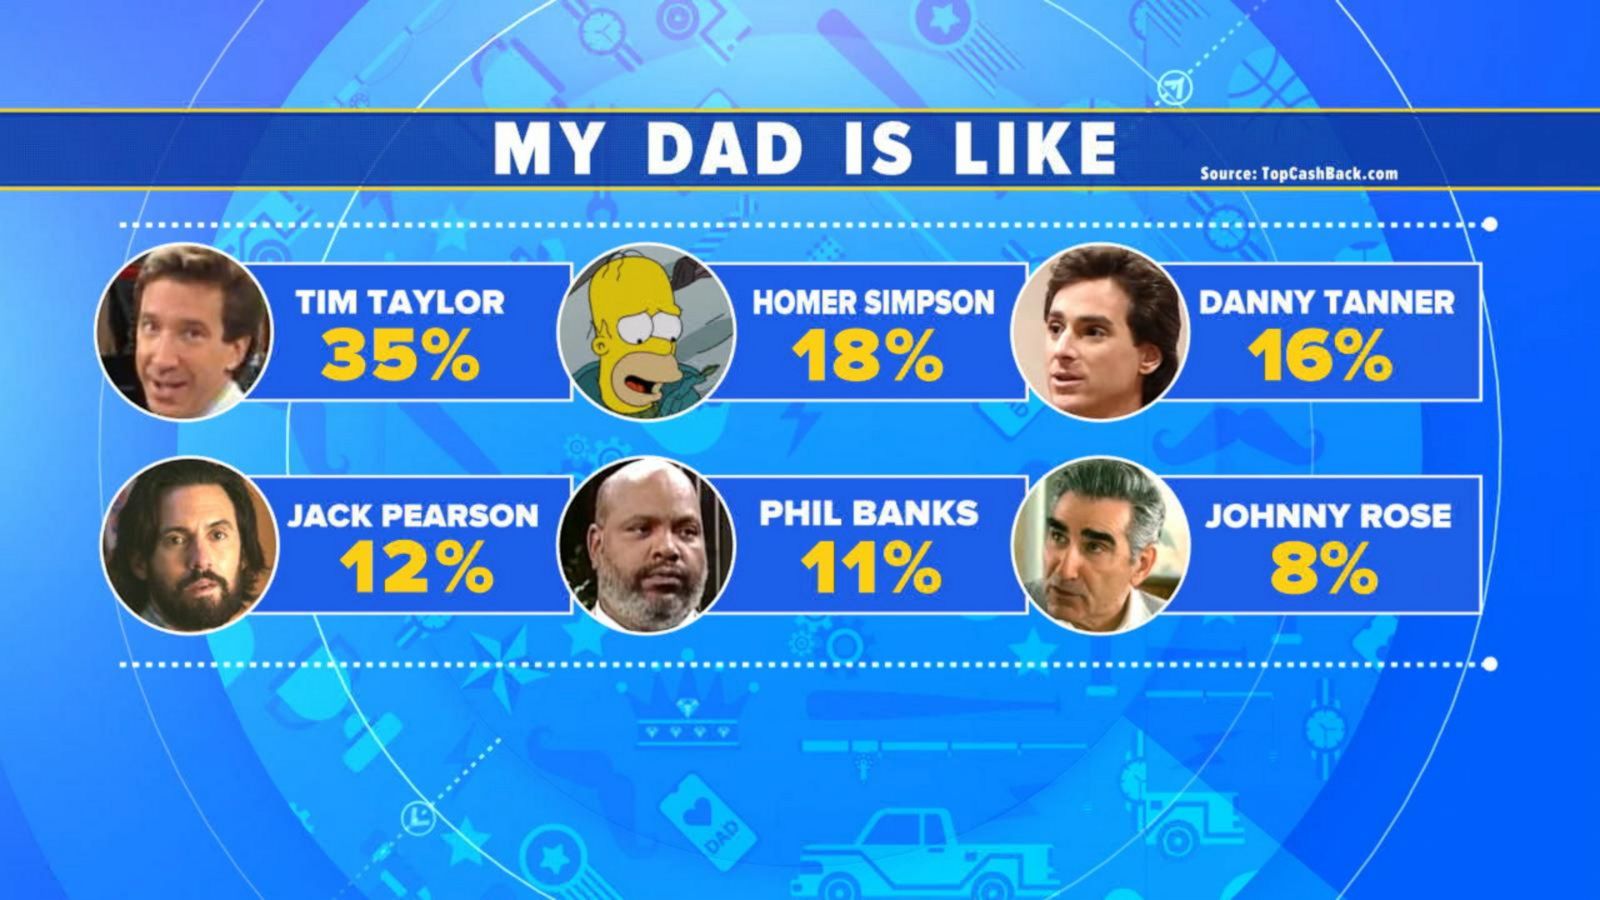 VIDEO: What TV dad is your father most like